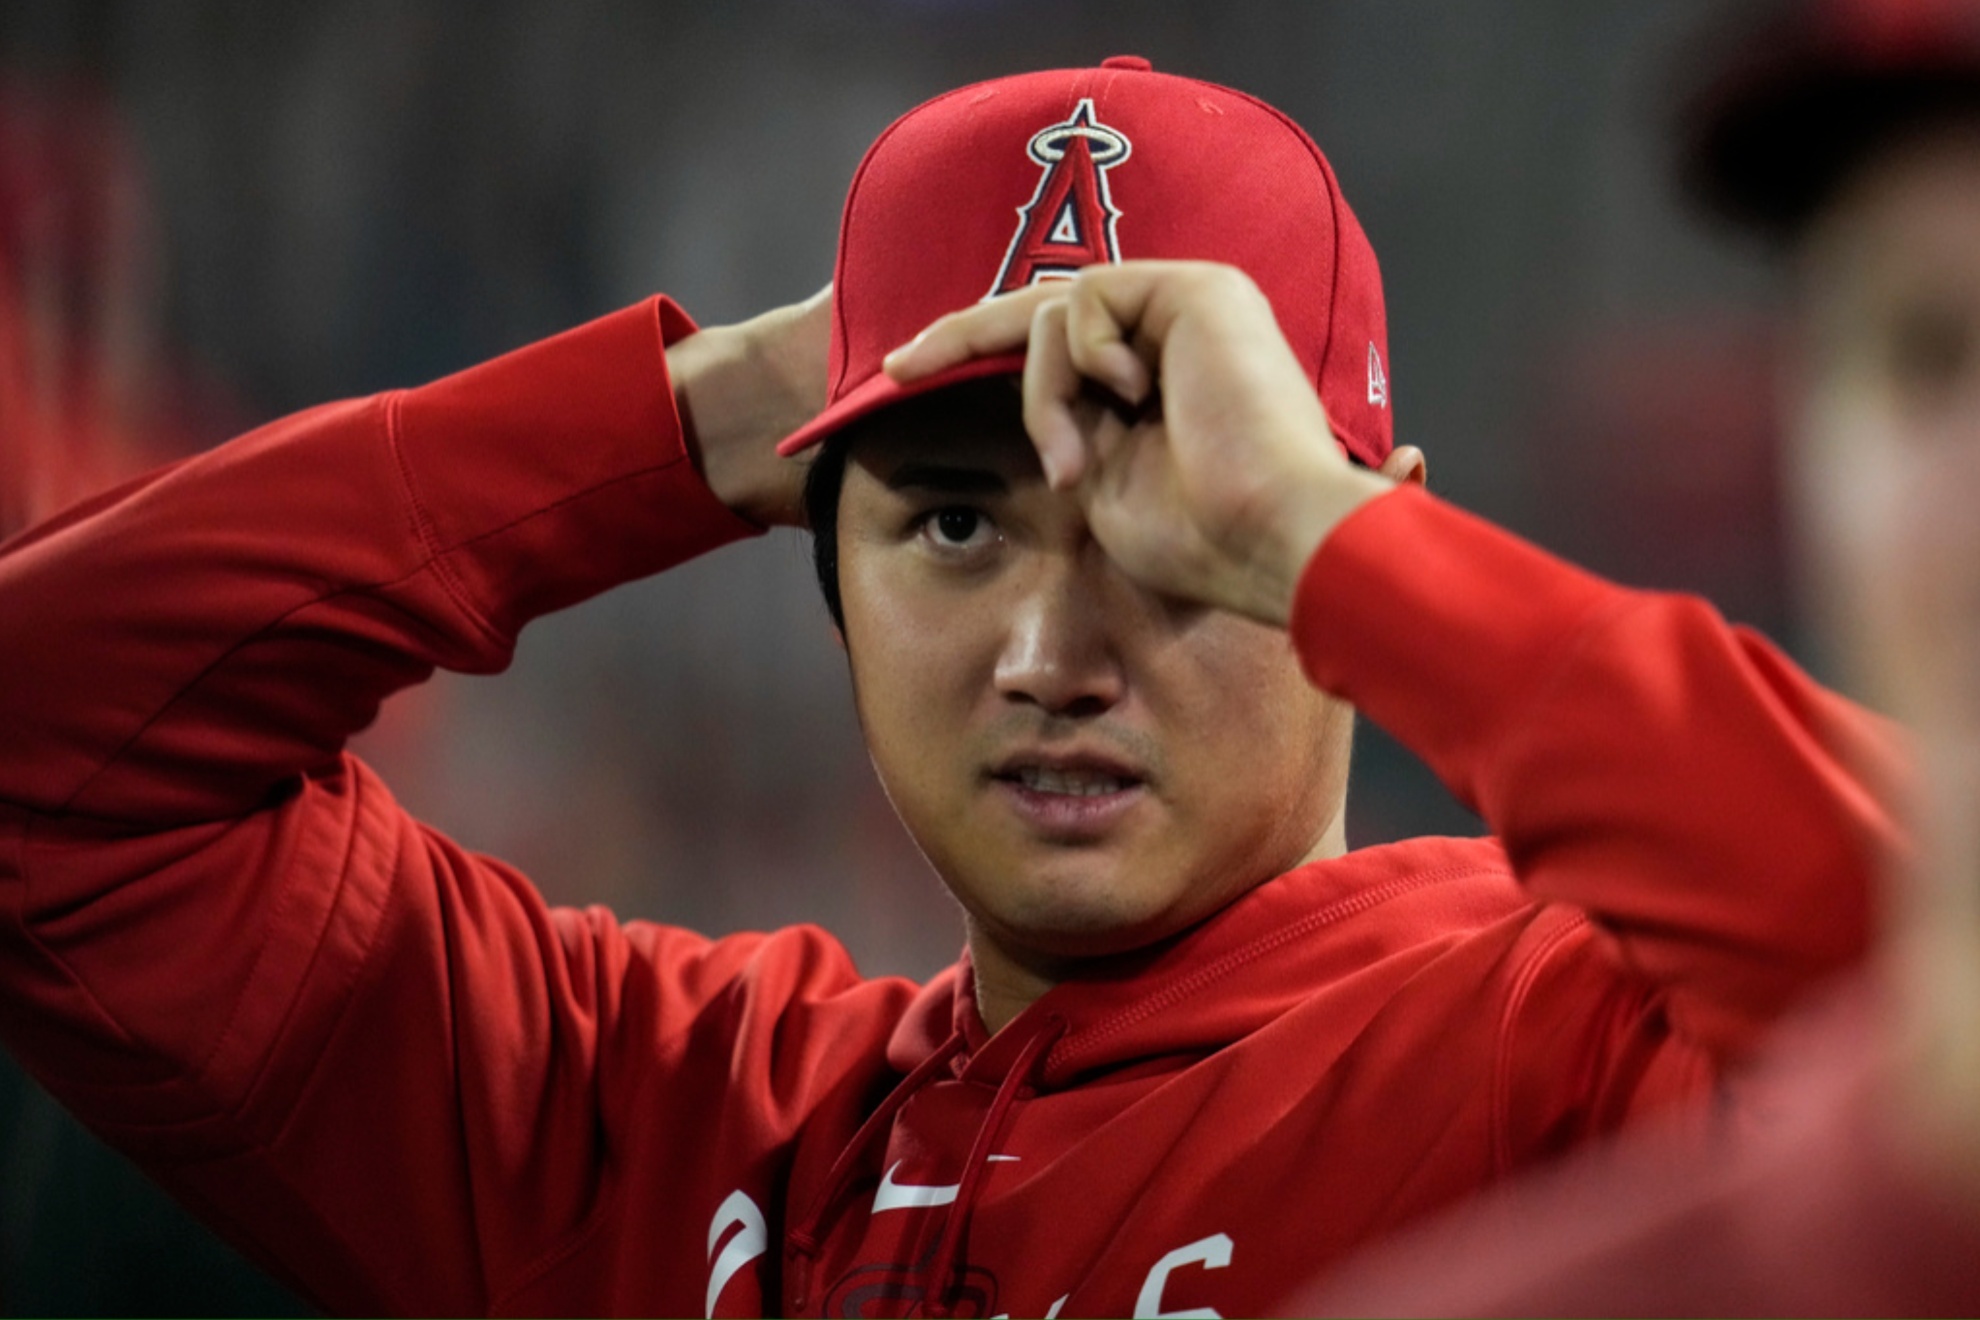 Shohei Ohtani will make free agency headlines until he finds a new MLB team